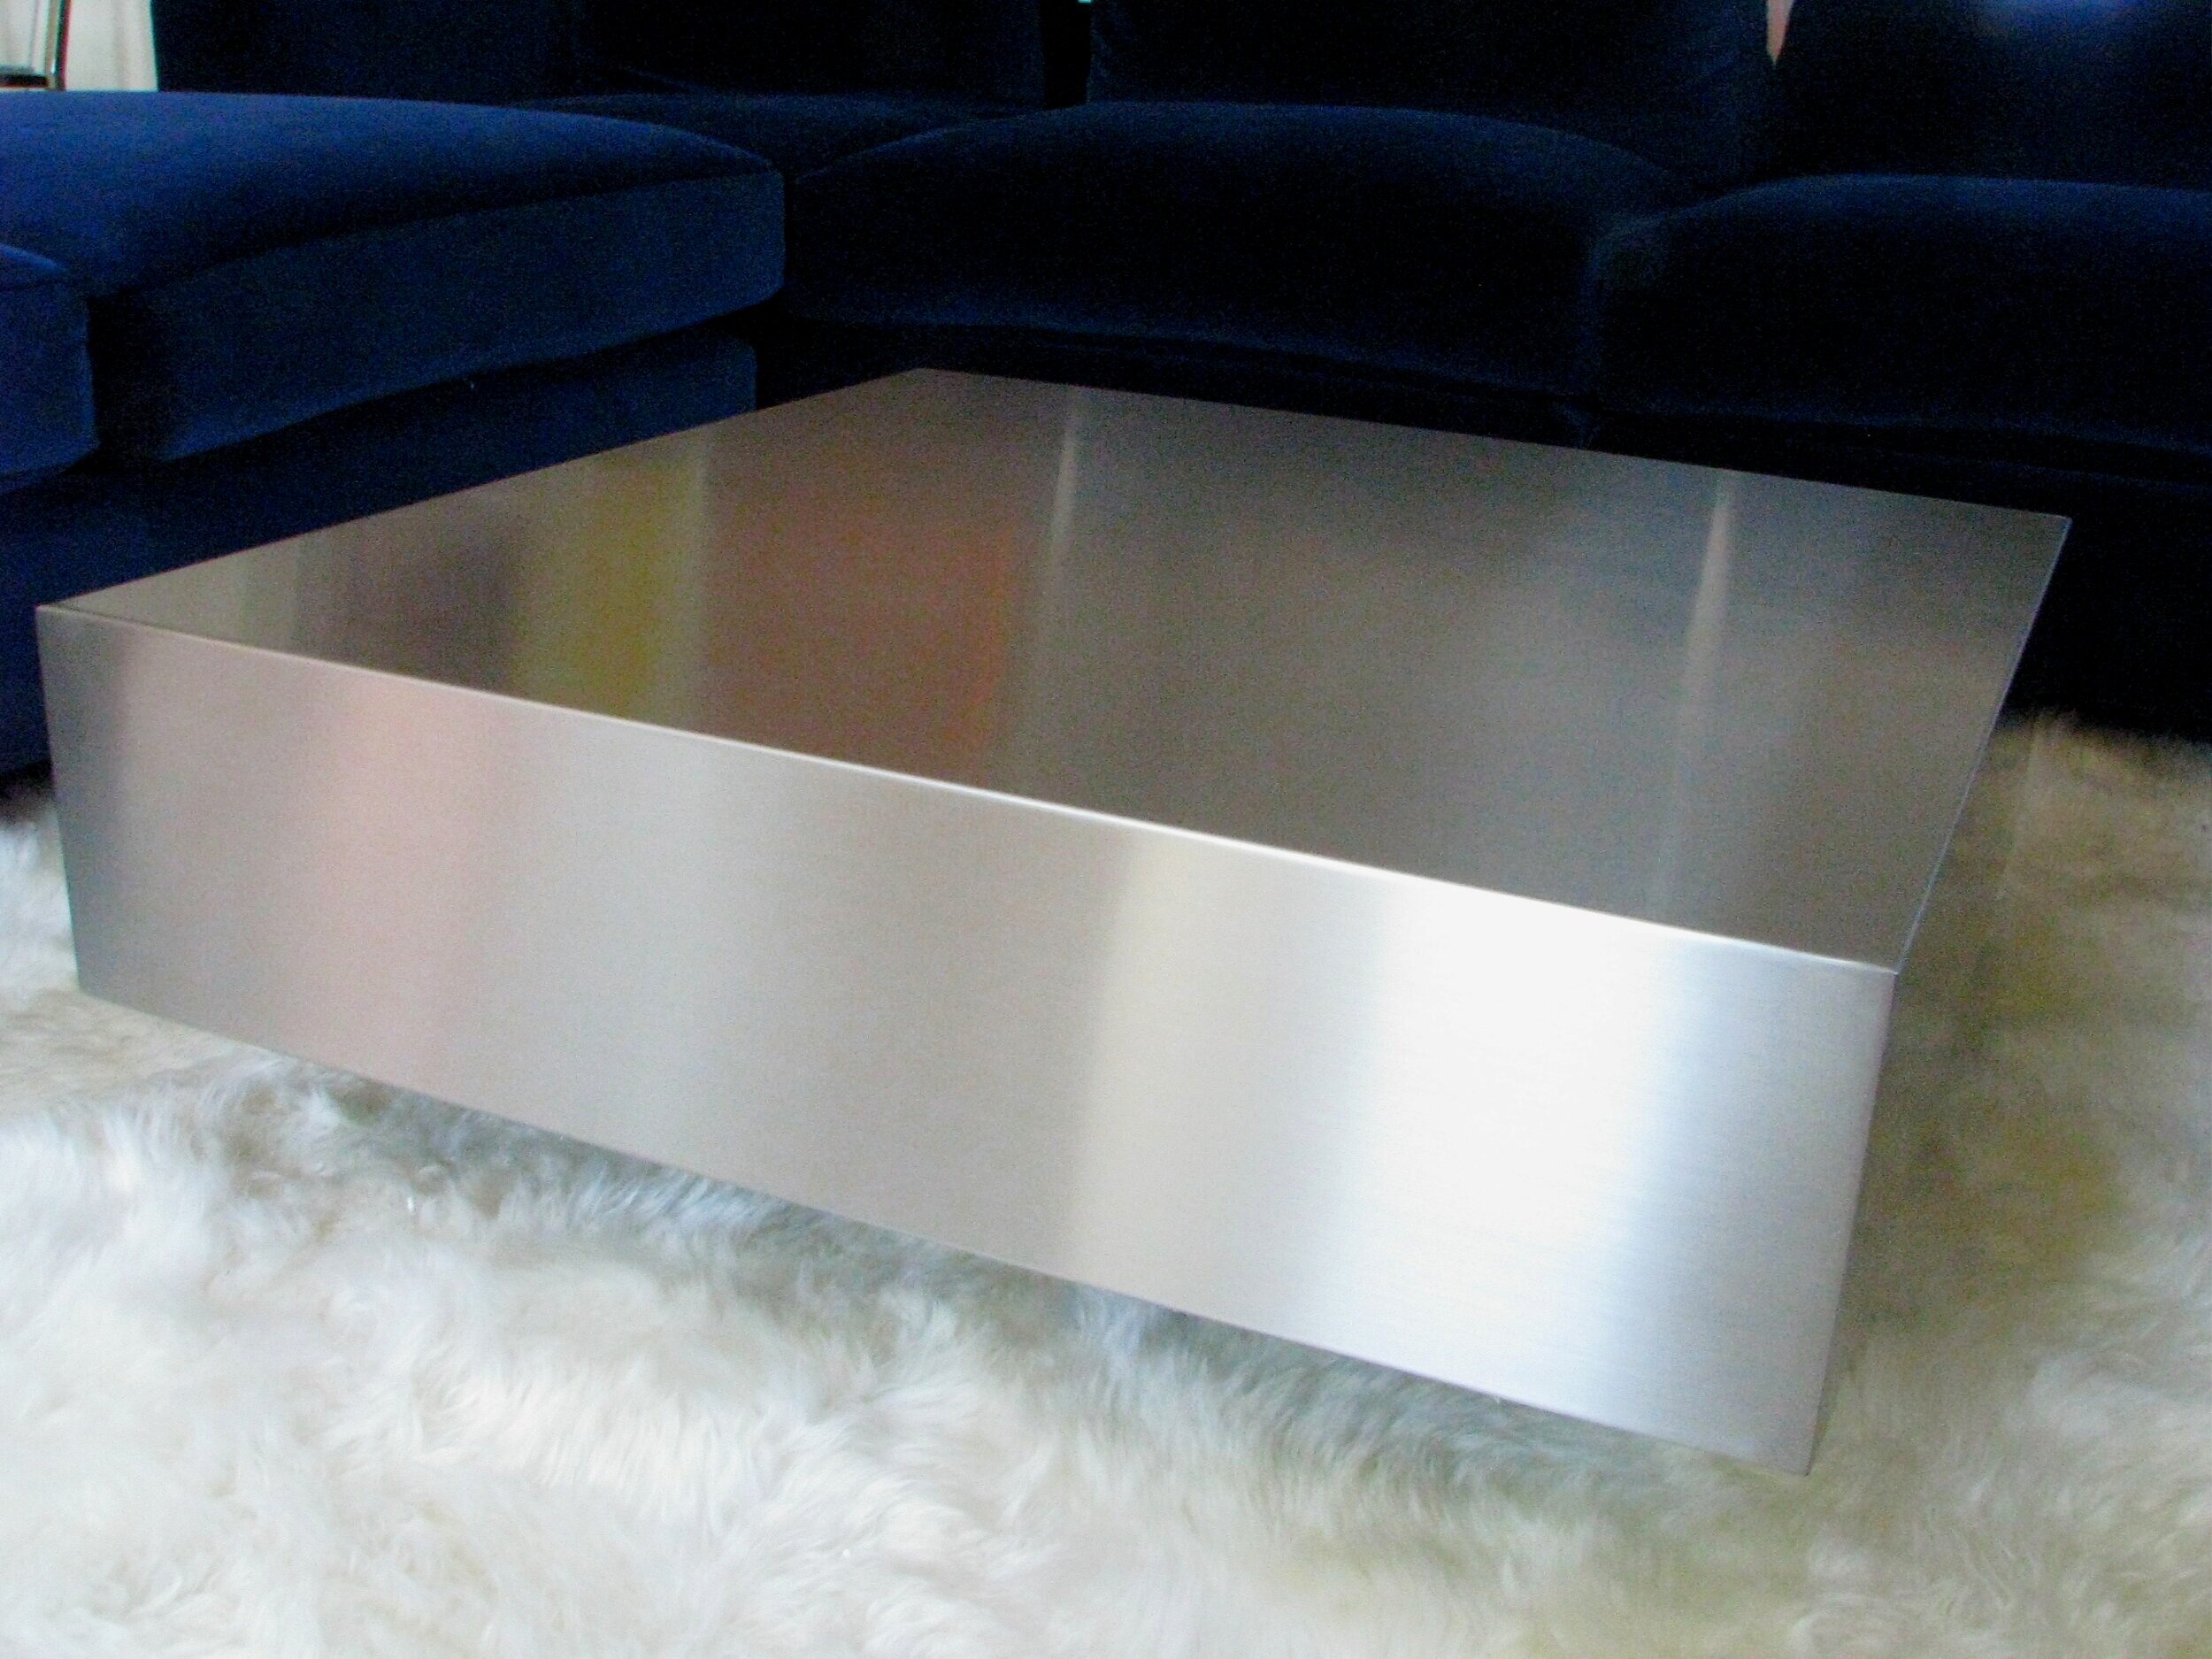 Mill Finished Stainless Steel Coffee Table